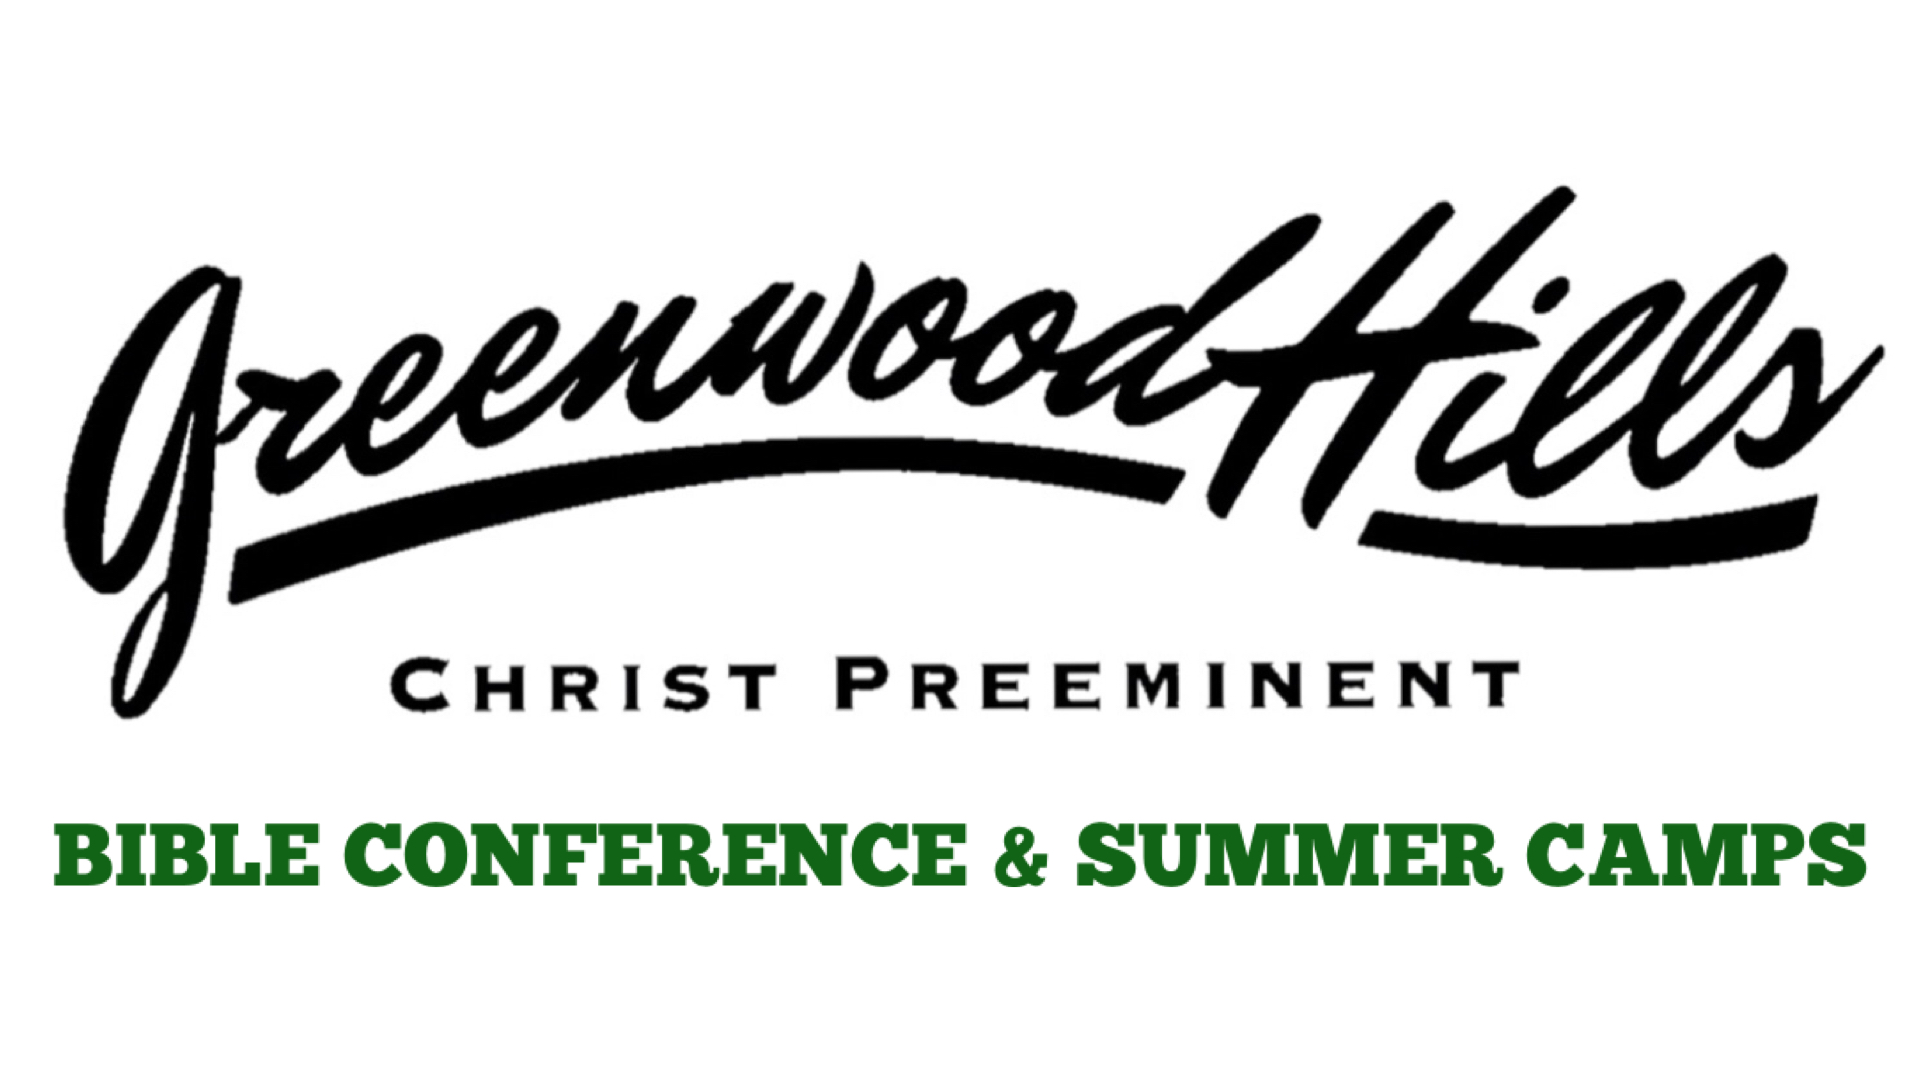 Greenwood Hills Bible Conference & Camps logo